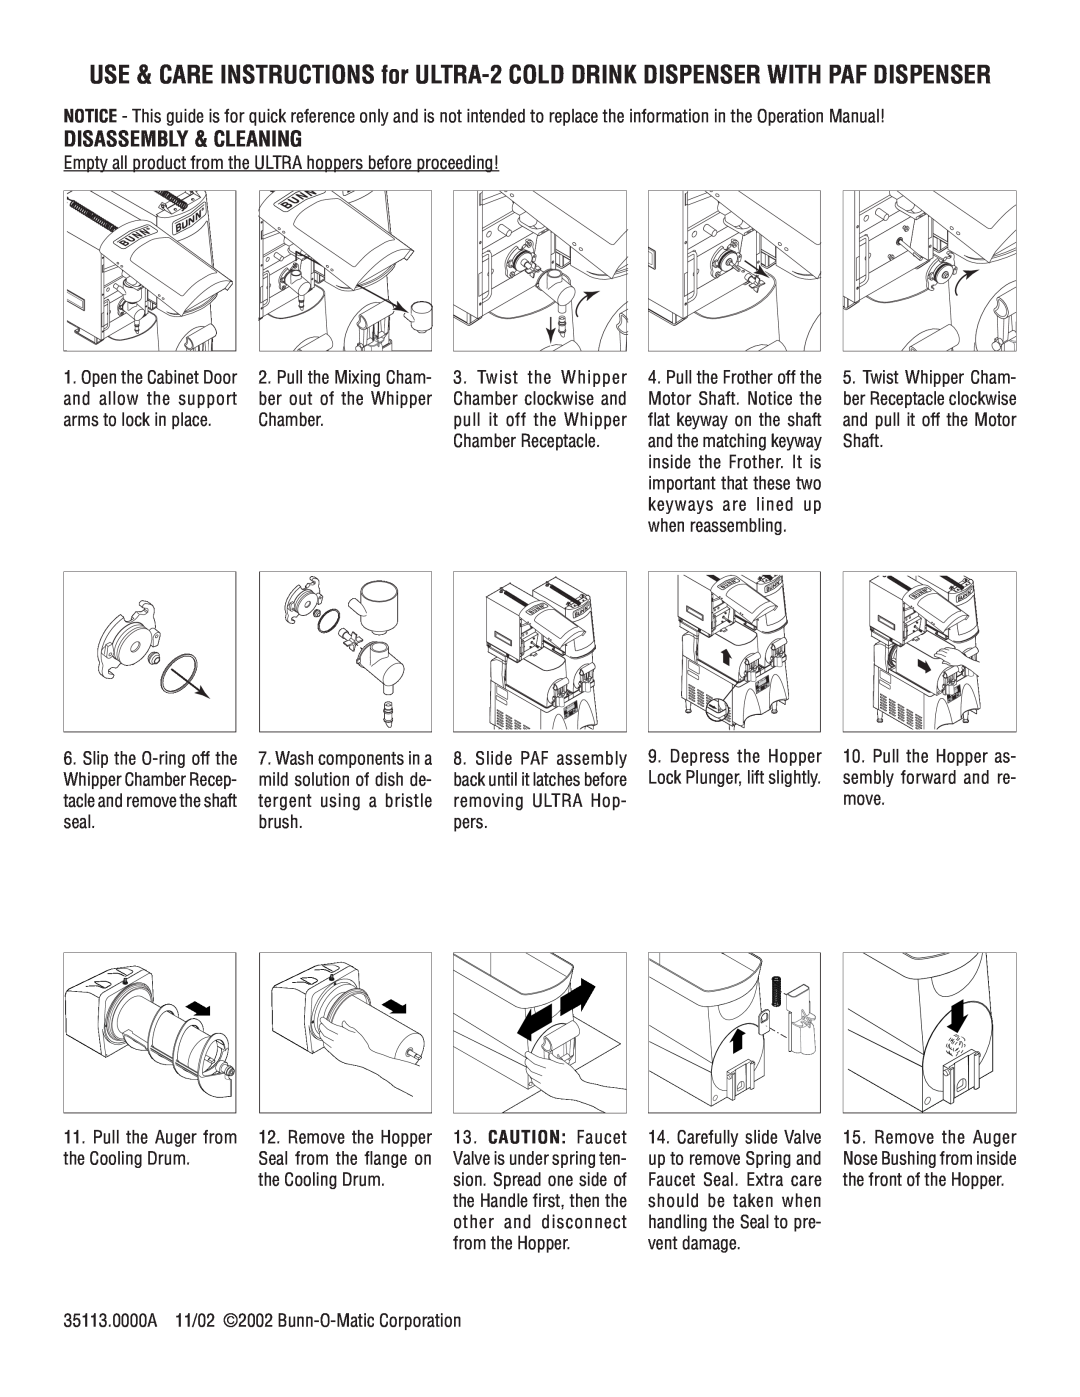 Bunn 2 operation manual Disassembly & Cleaning 